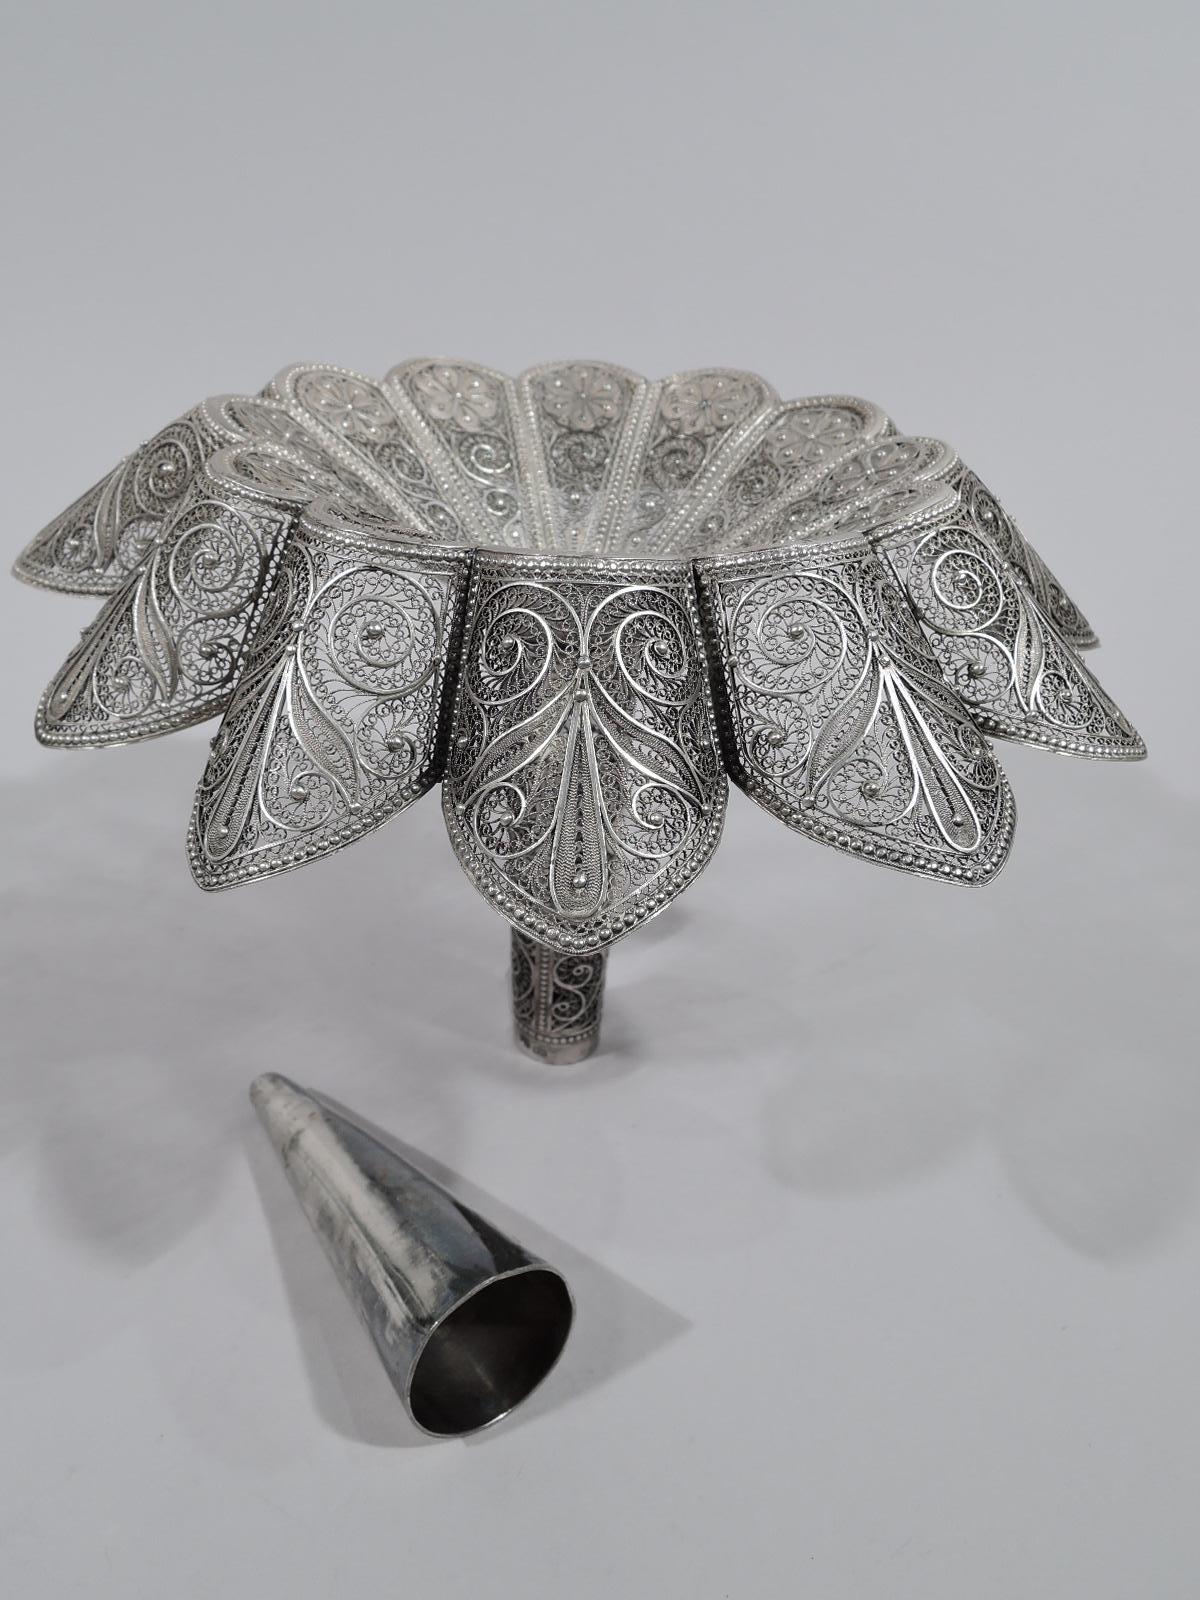 Antique Russian 875 posy holder, circa 1880. Shallow cone with lobed and turned-down petal rim, and tapering cylindrical hollow handle. Allover filigree with stylized leaves, flower heads, and scrolls. Mono-plate engraved with initials—possibly